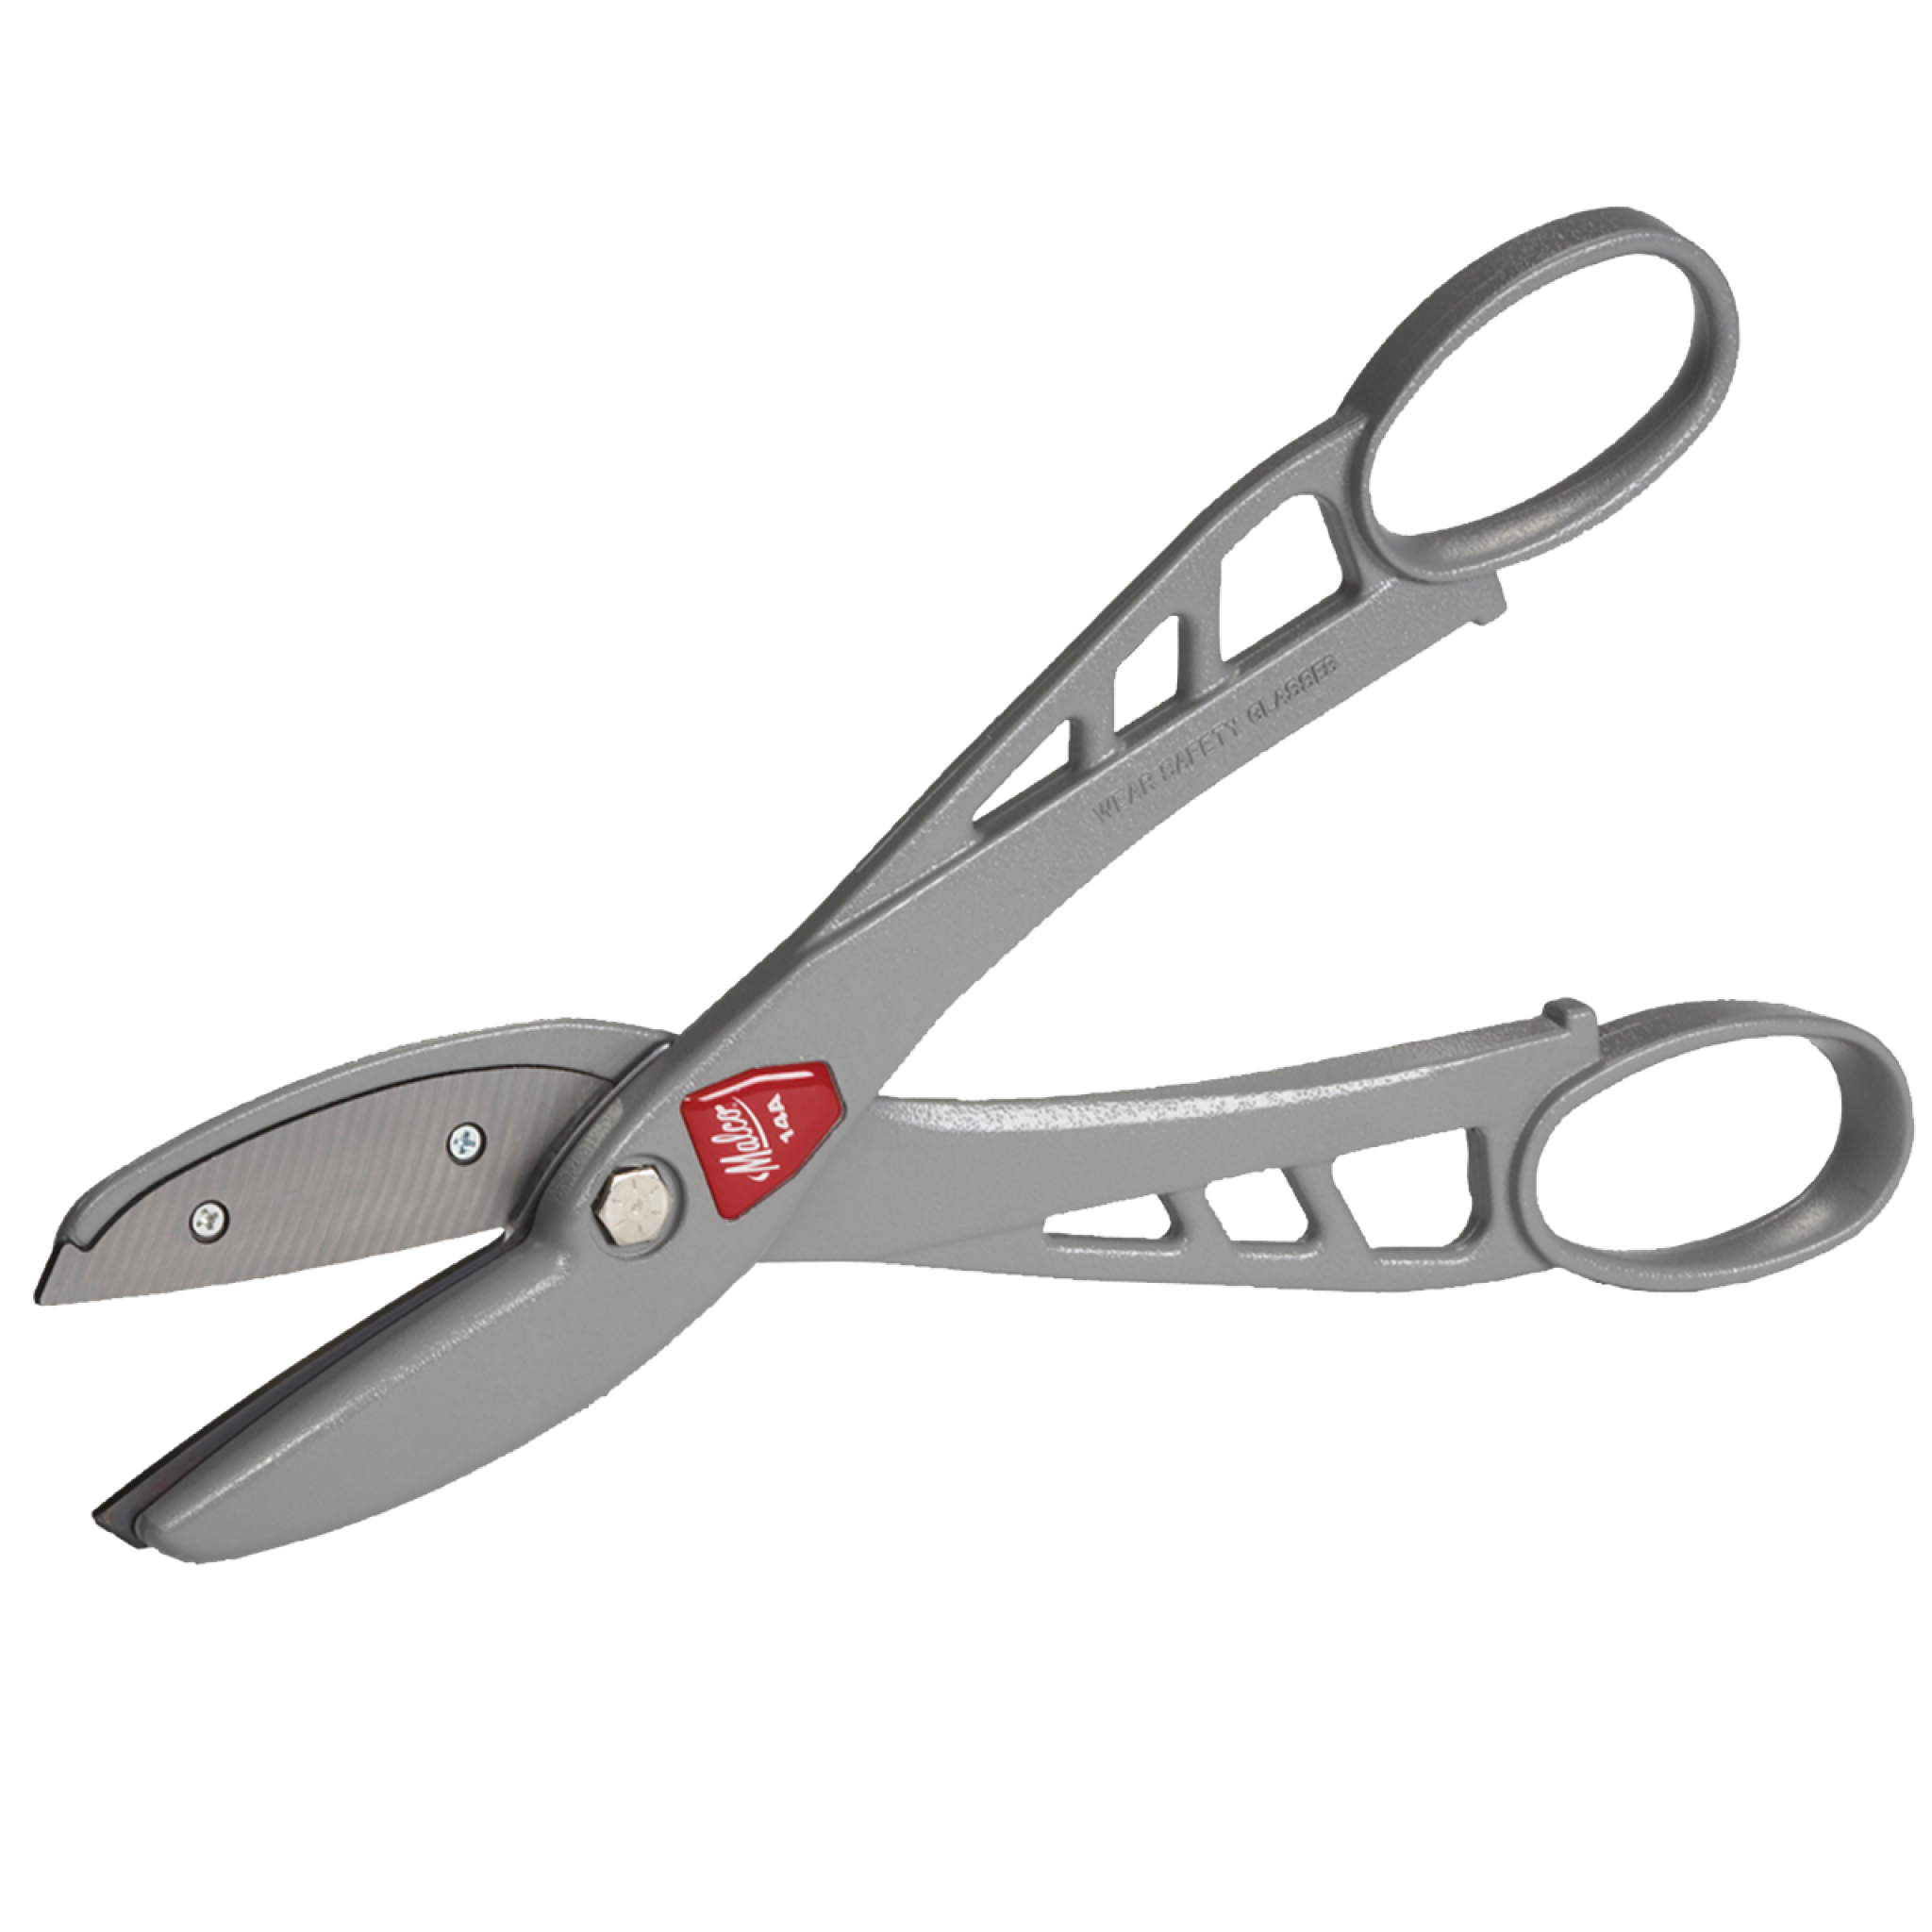 Andy Combination Snip Replacement Blades (M12RB)